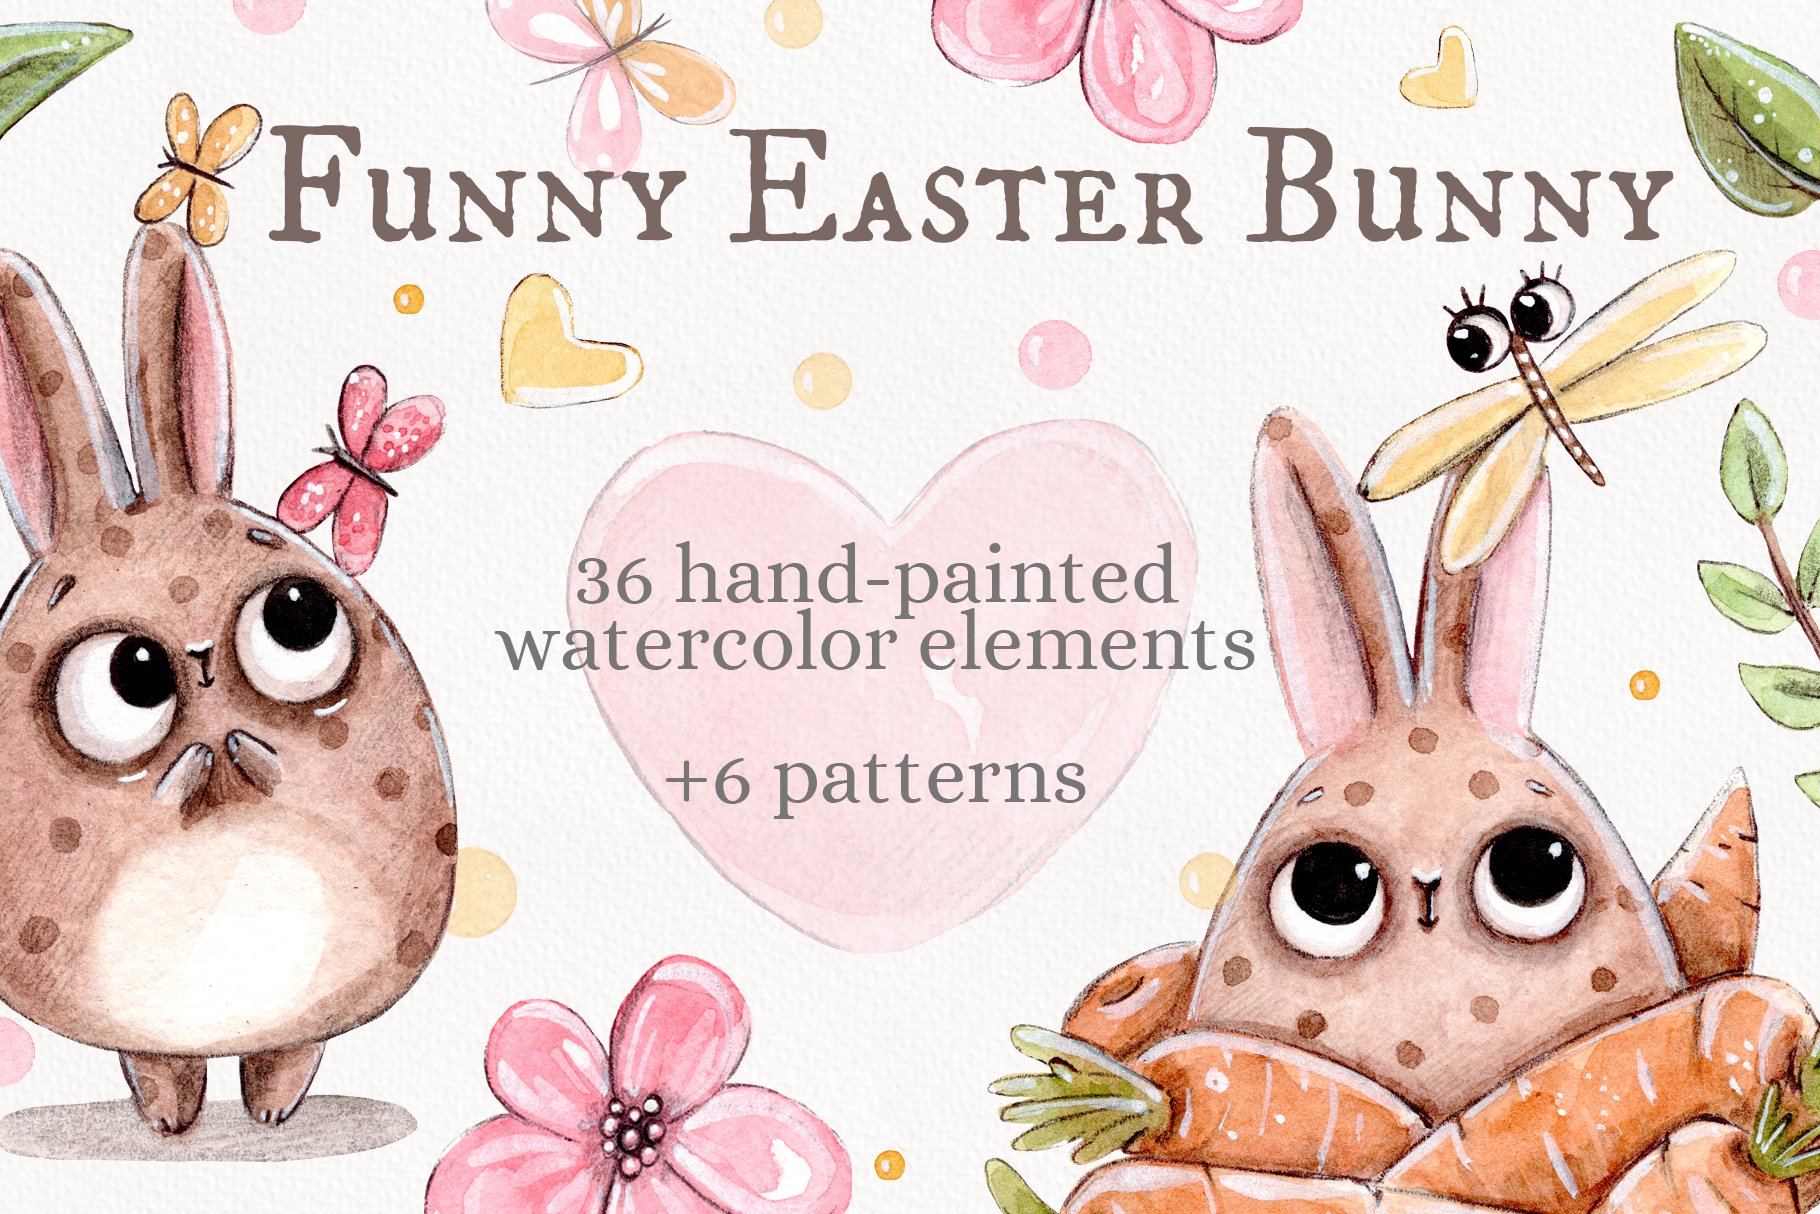 Cute Easter collection with the Bunnies.